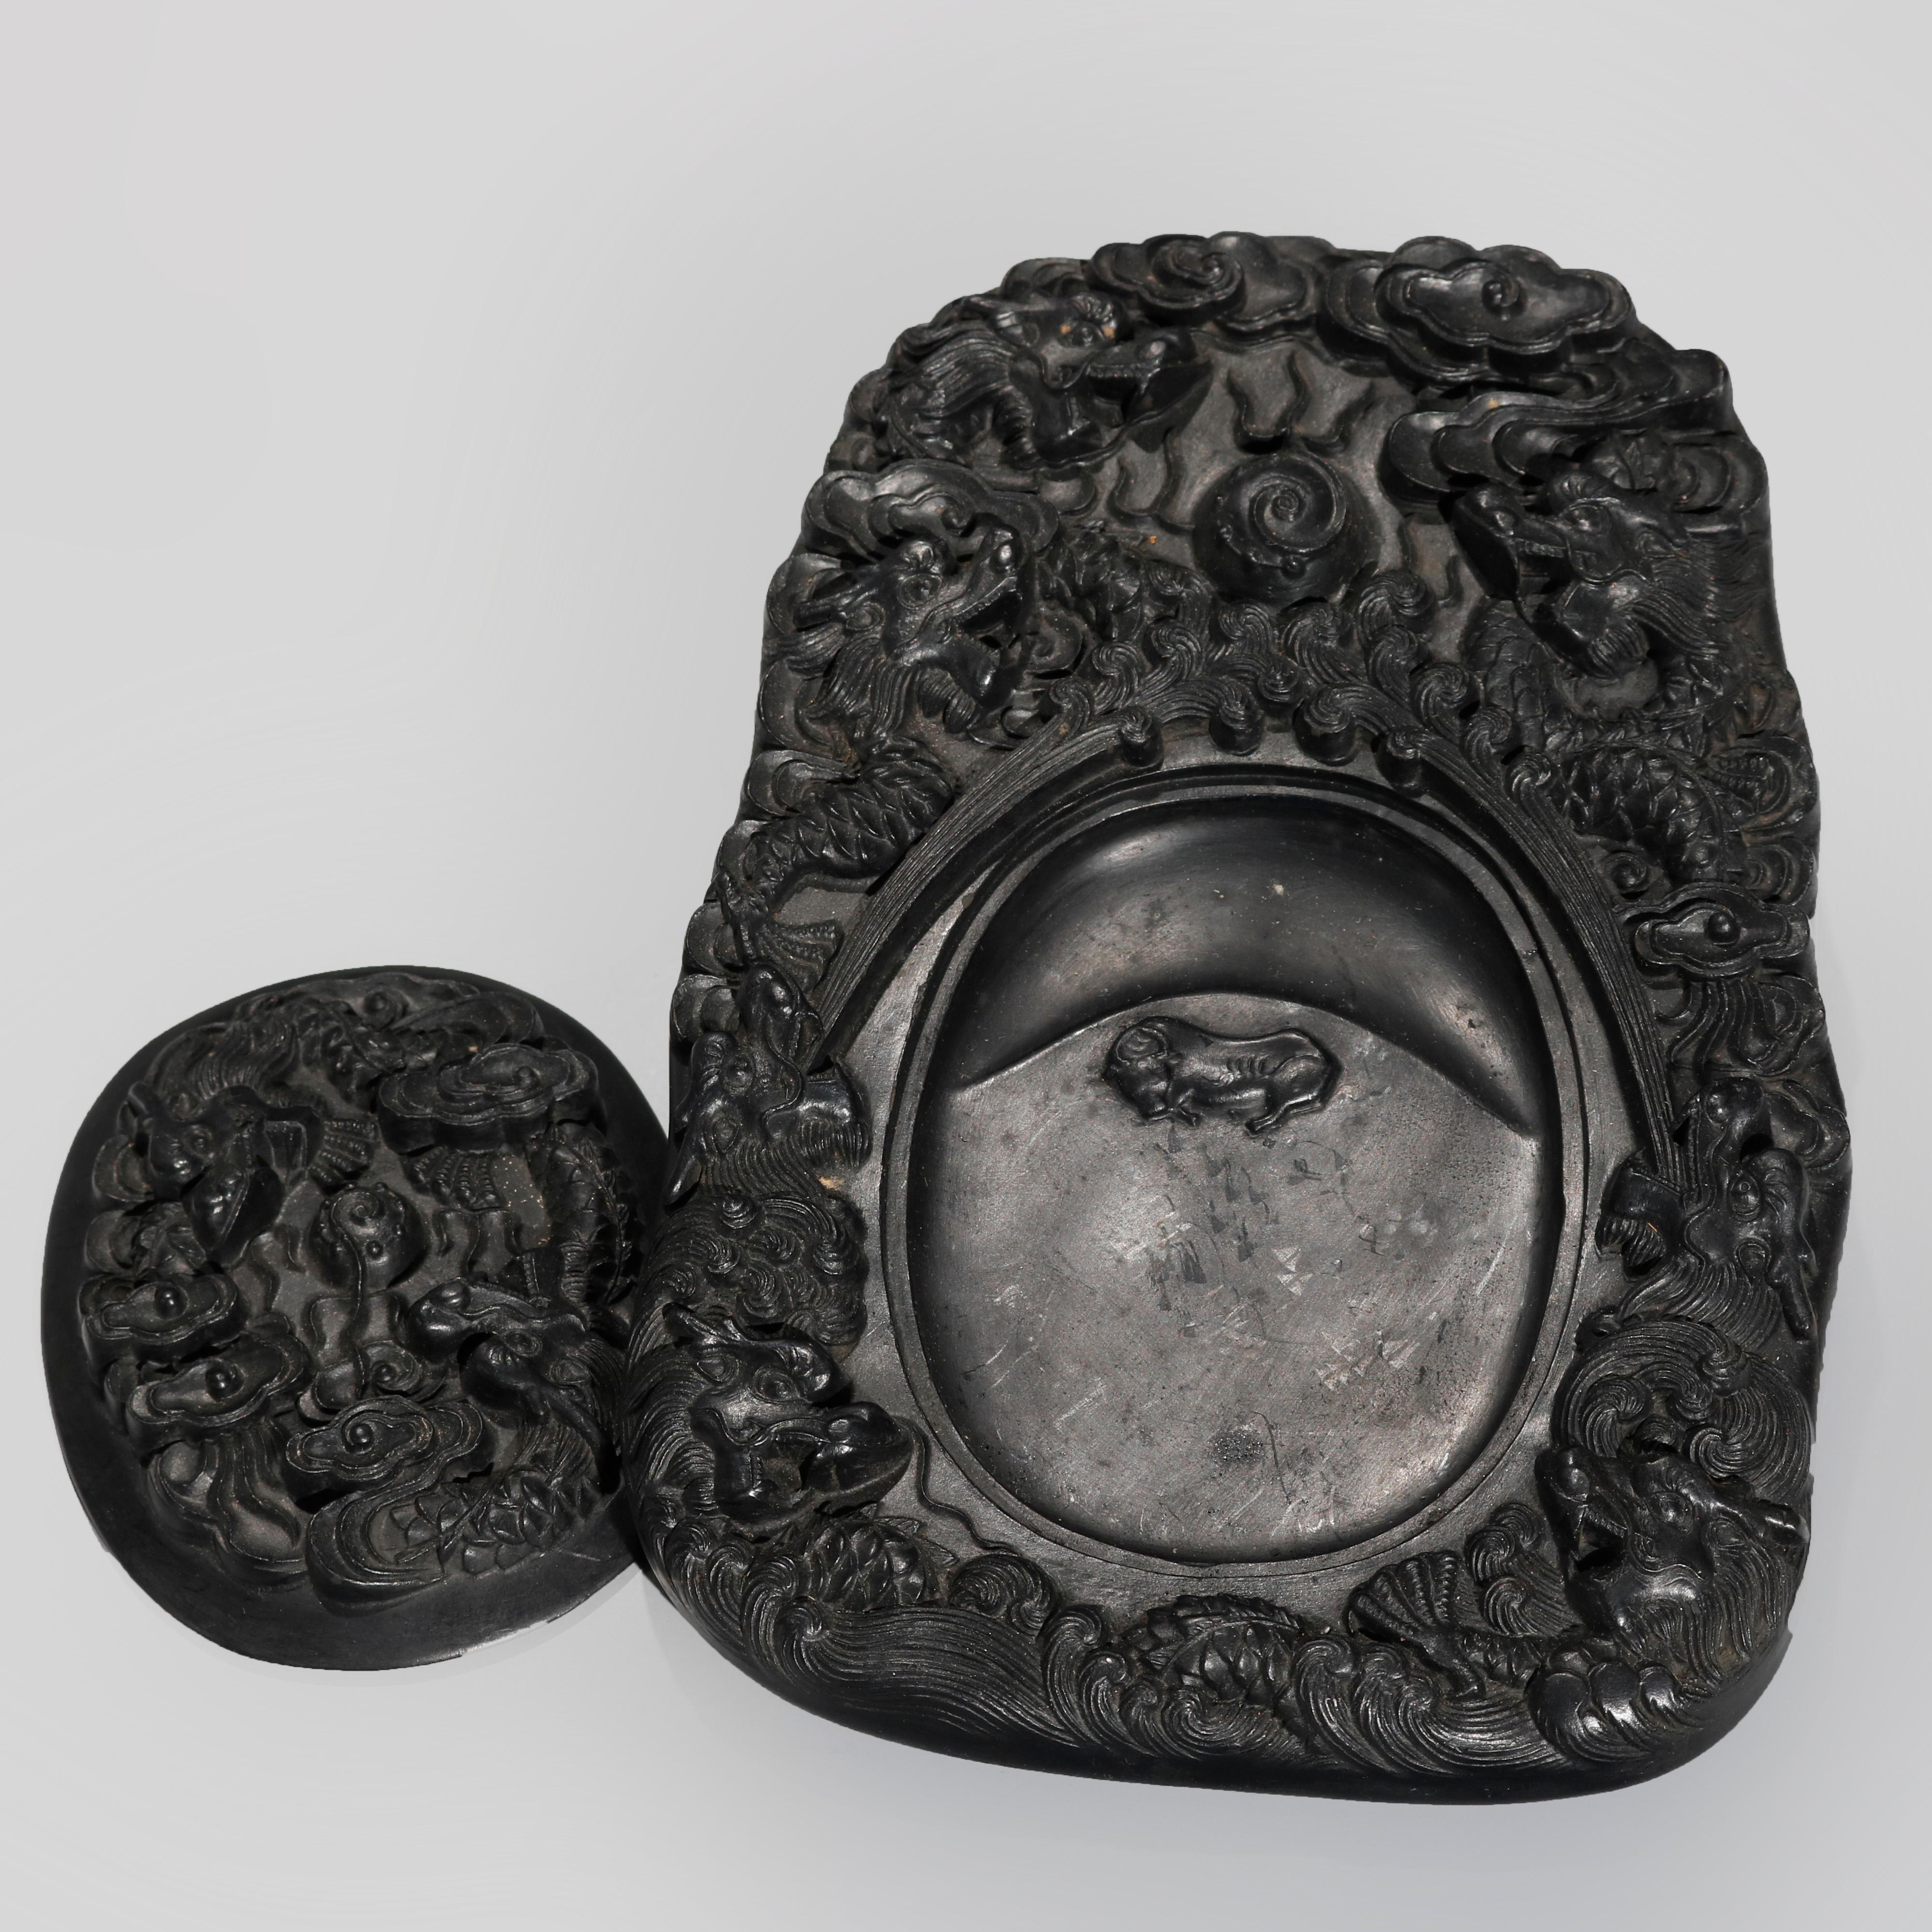 An antique Chinese censer offers ebony stone construction with all-over carved dragon design, includes base and lid, 20th century

Measures: 9.25